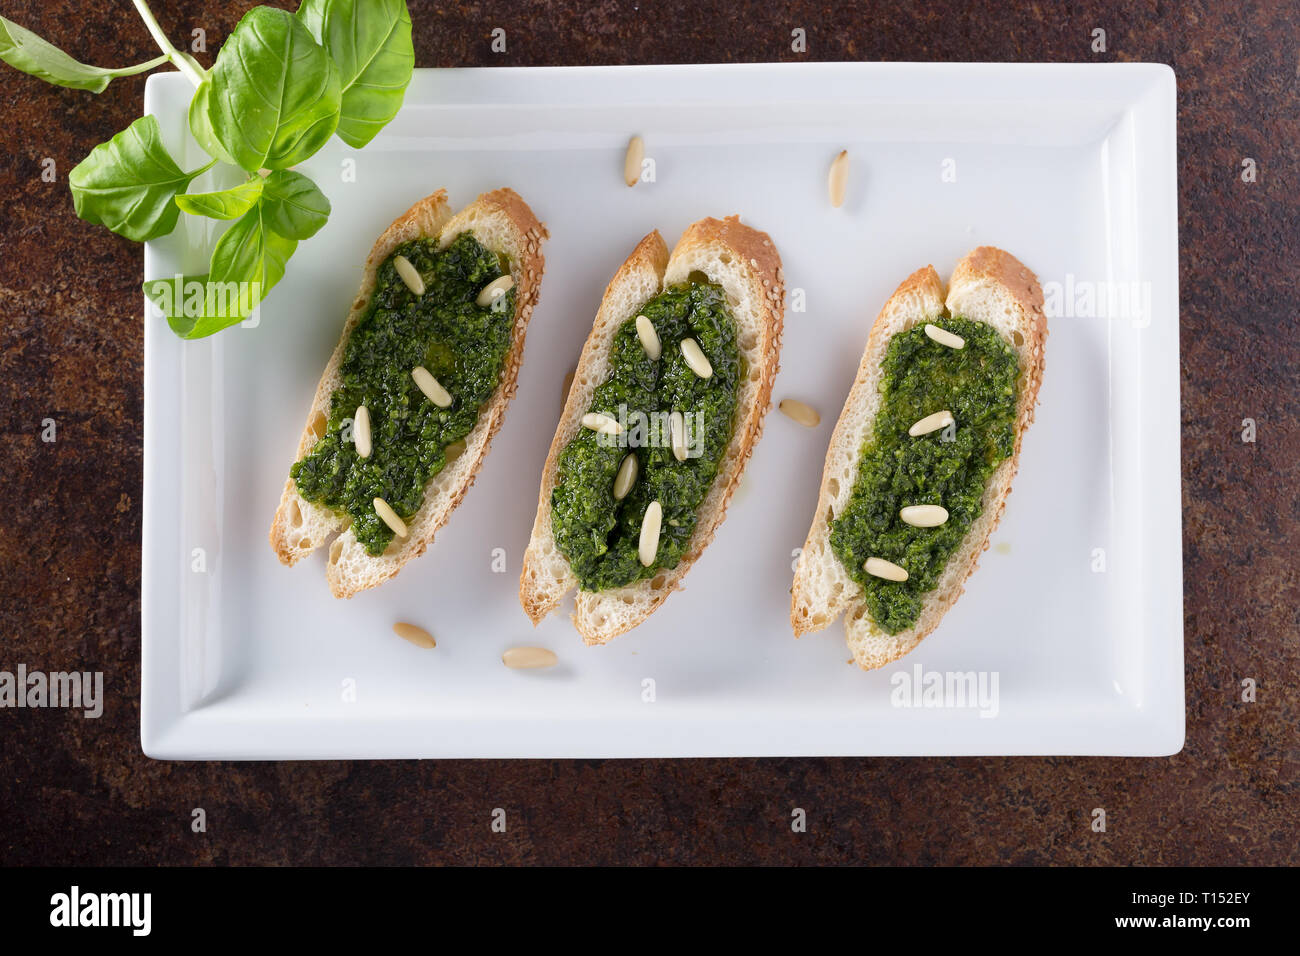 Bruschetta with basil pesto sauace and pinoli, on a white plate. Healthy food, diet and cooking concept. Specialties of Italian cuisine. Selective sof Stock Photo